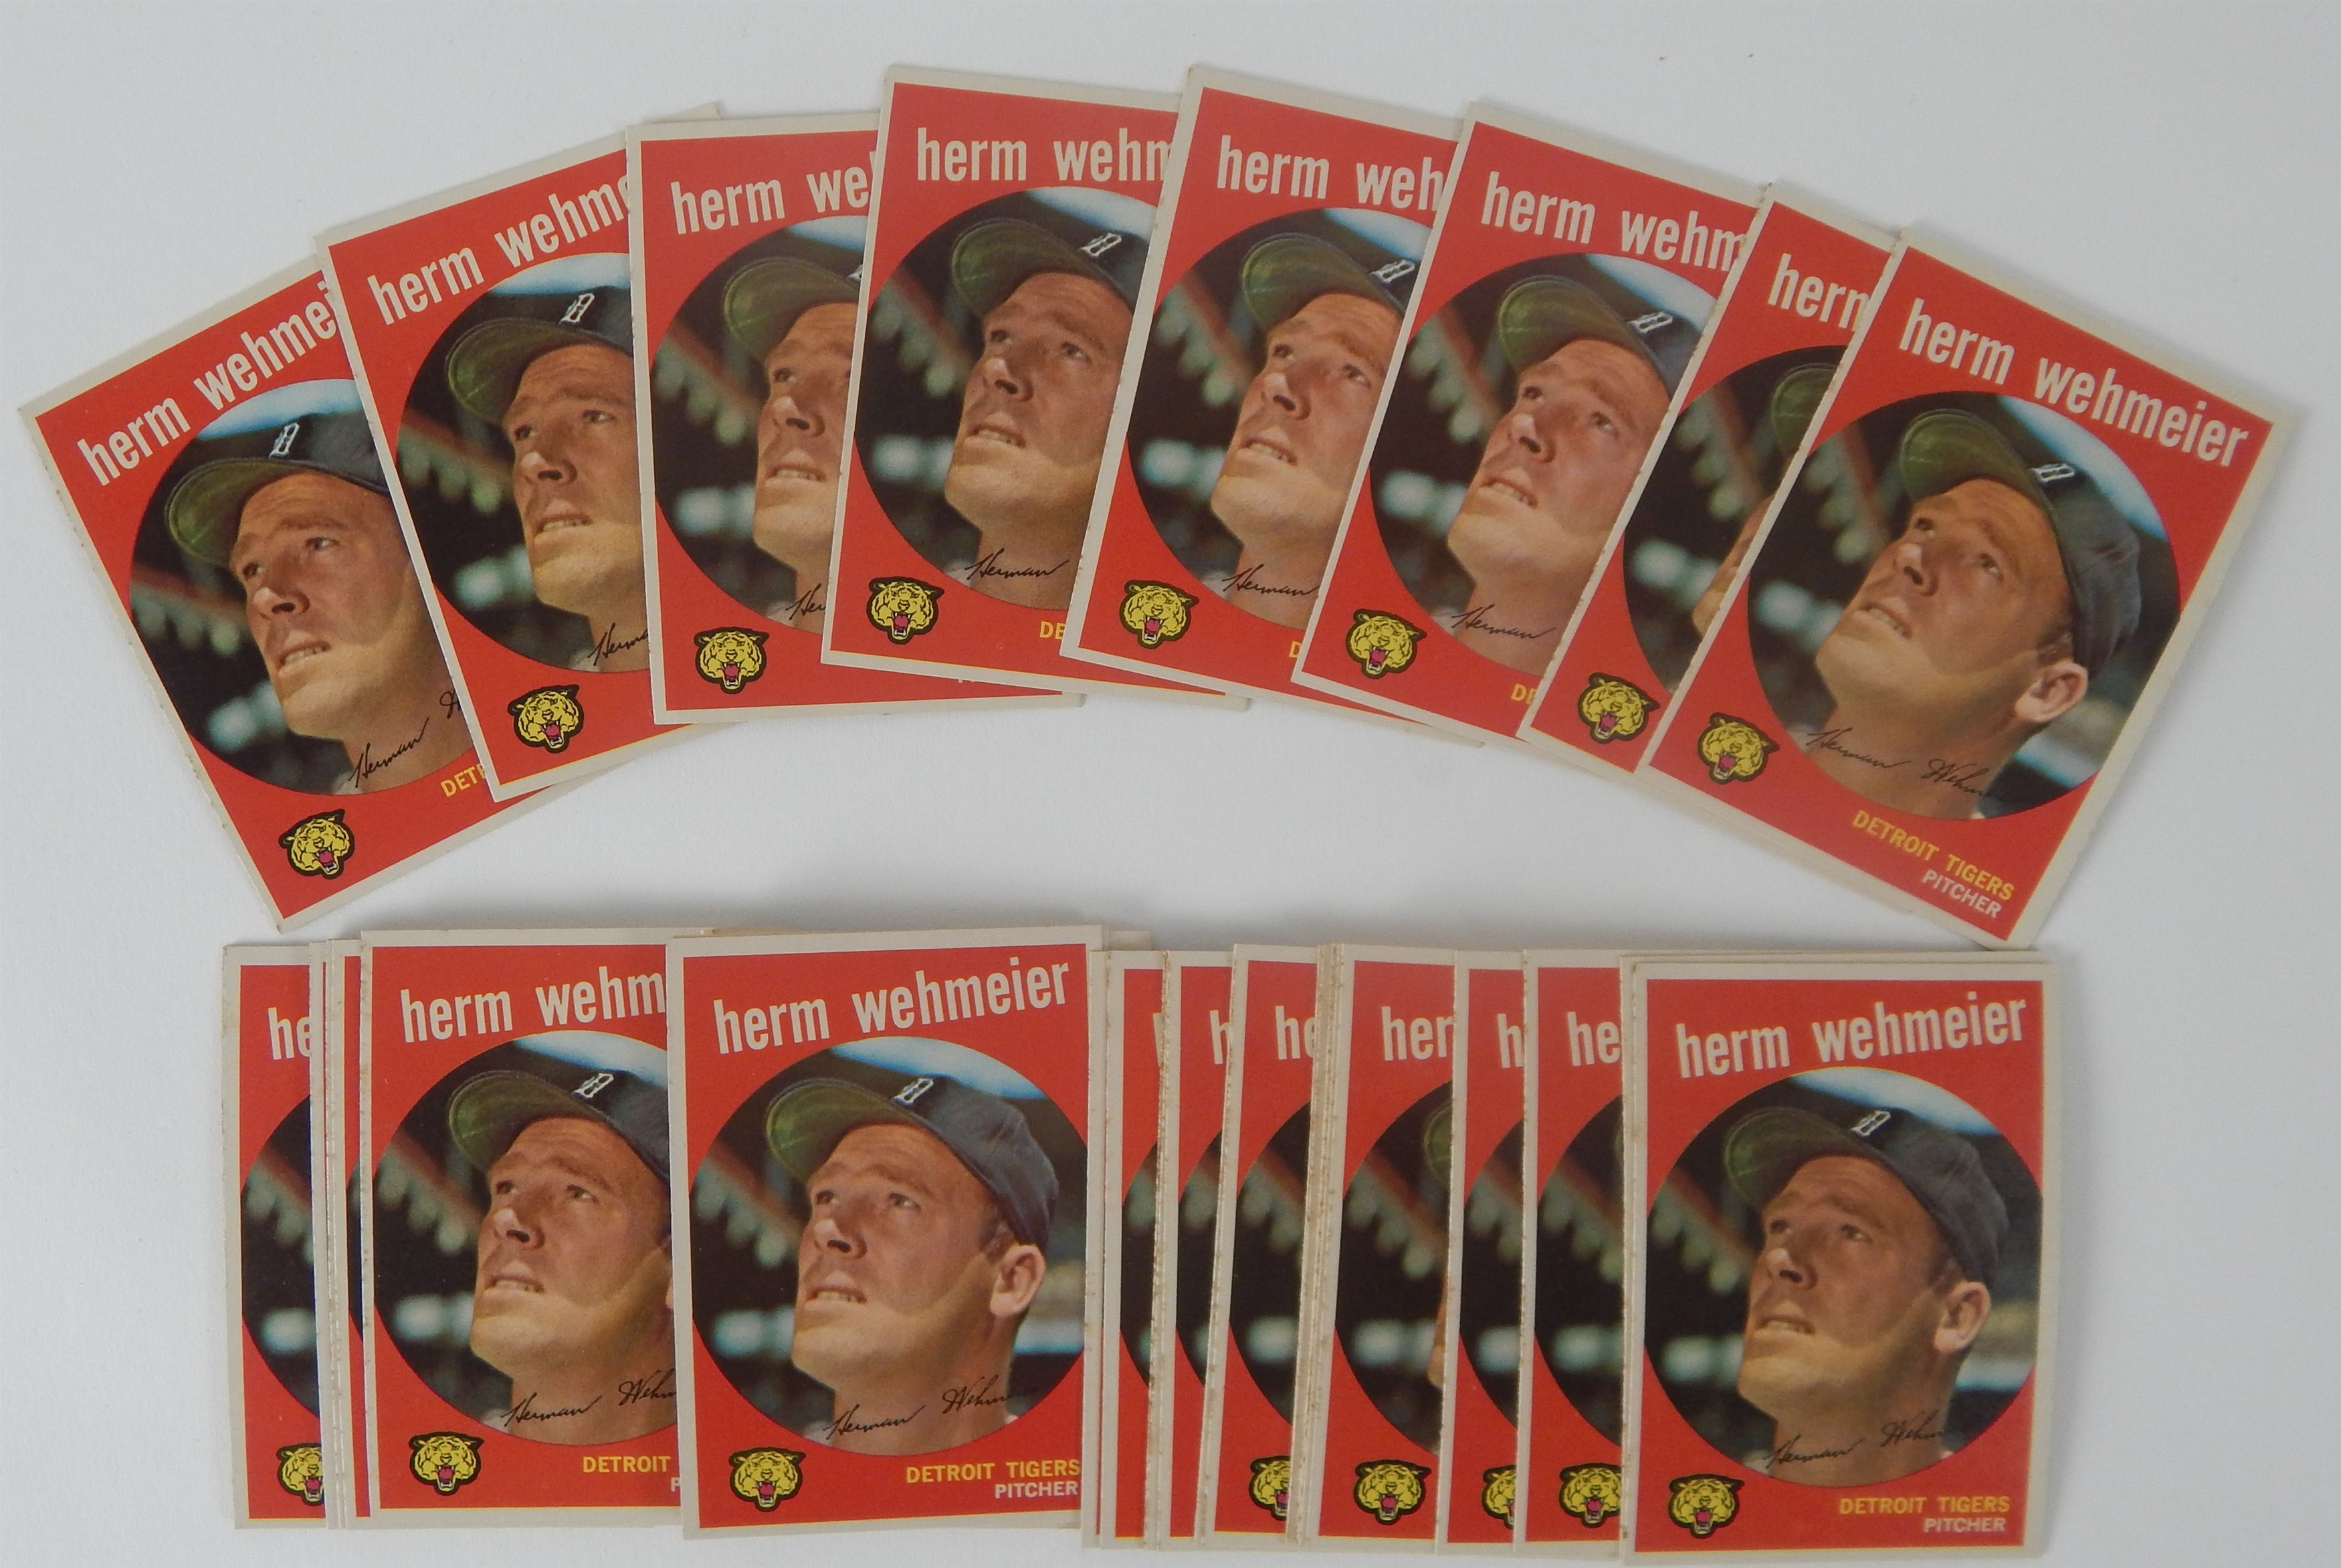 Baseball and Trading Cards - 1959 Topps #421 Herm Wehmeier Lot of 75